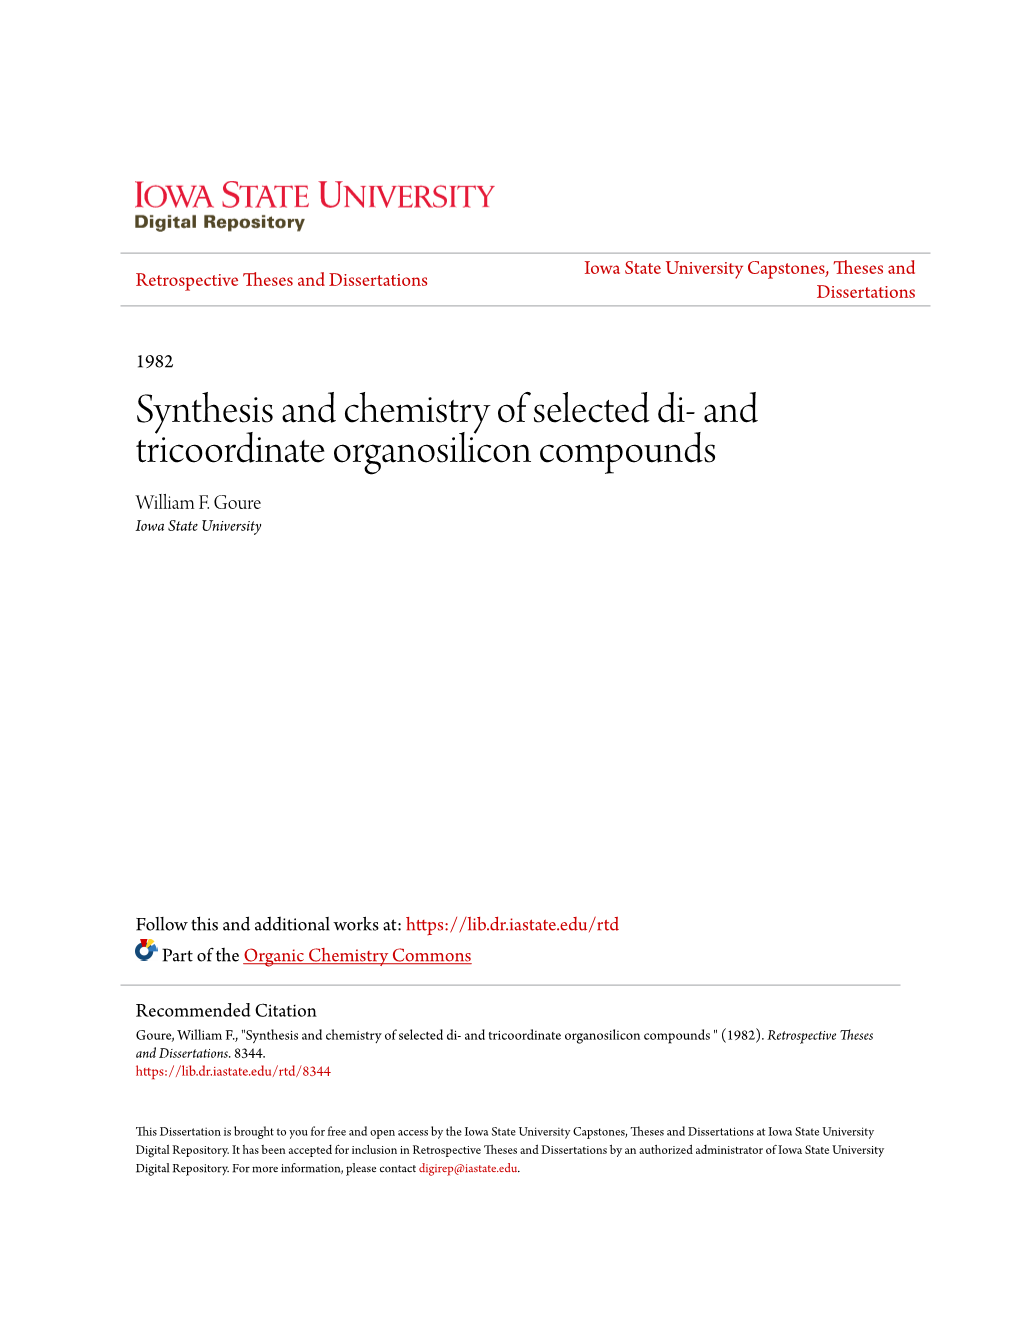 Synthesis and Chemistry of Selected Di- and Tricoordinate Organosilicon Compounds William F